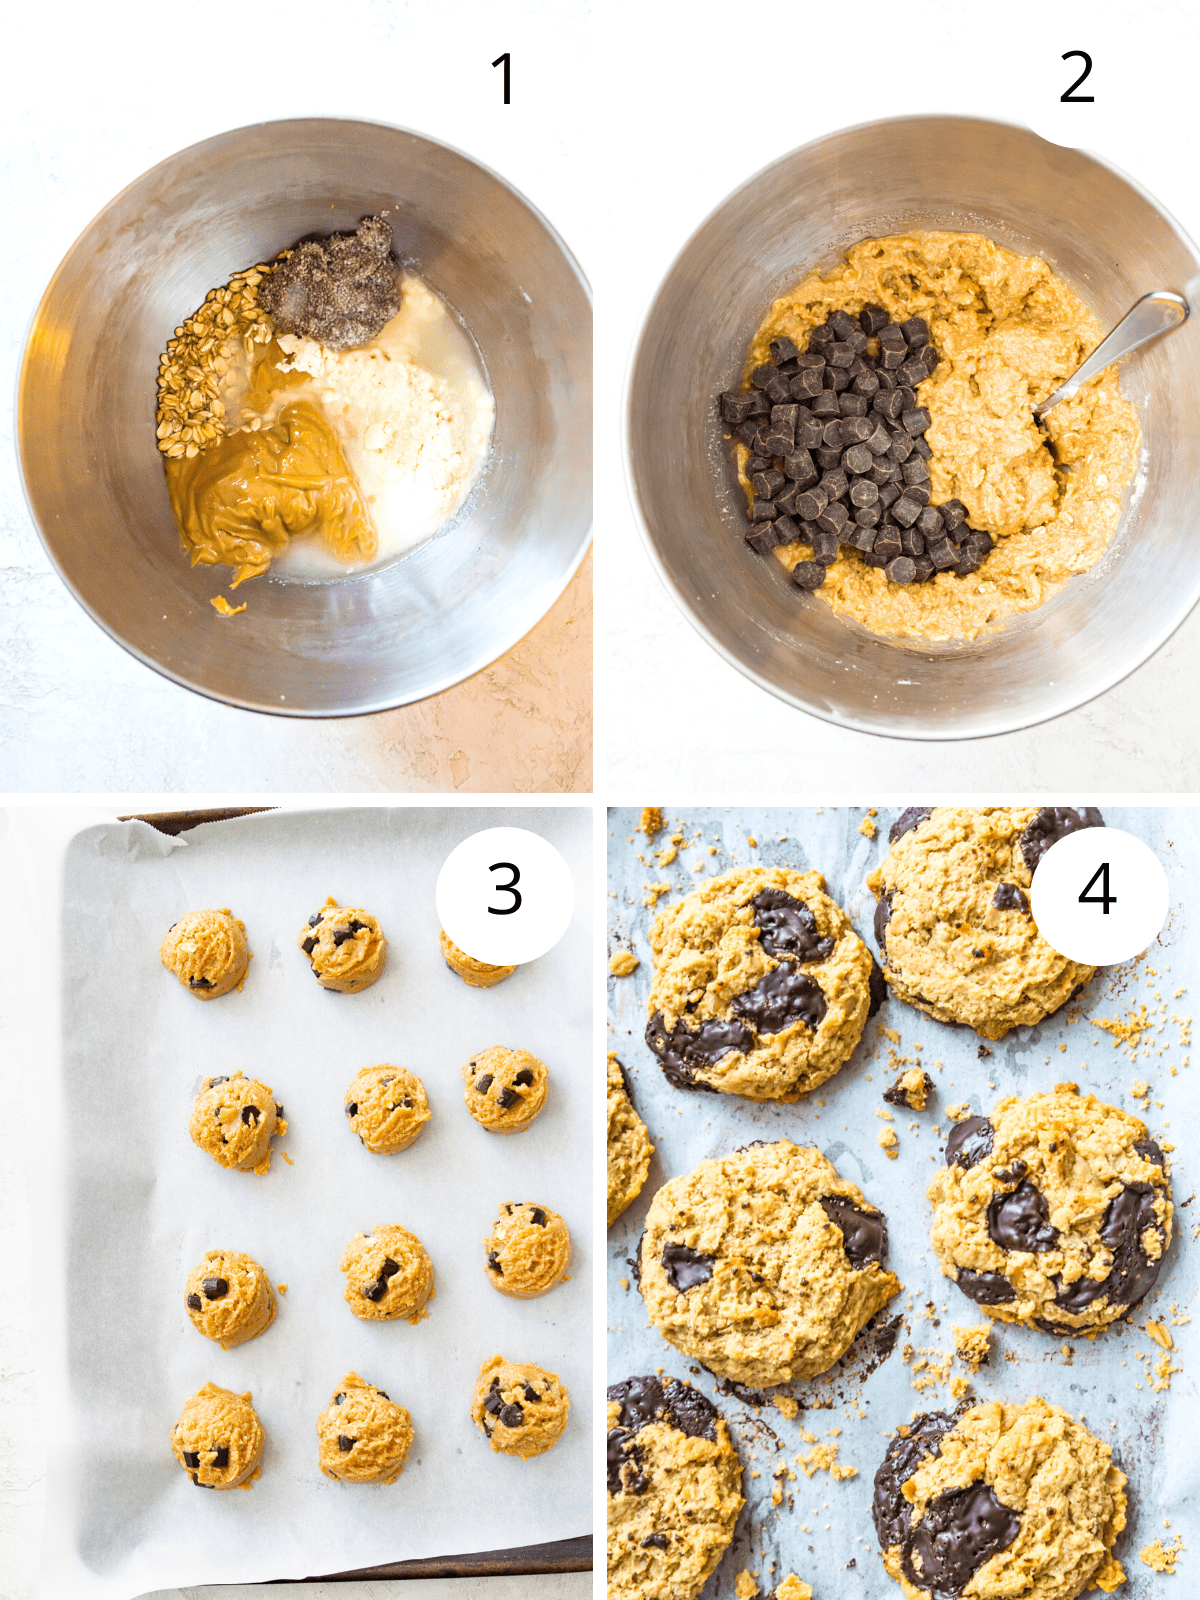 Step by step directions for making plant based protein powder cookies with chocolate.